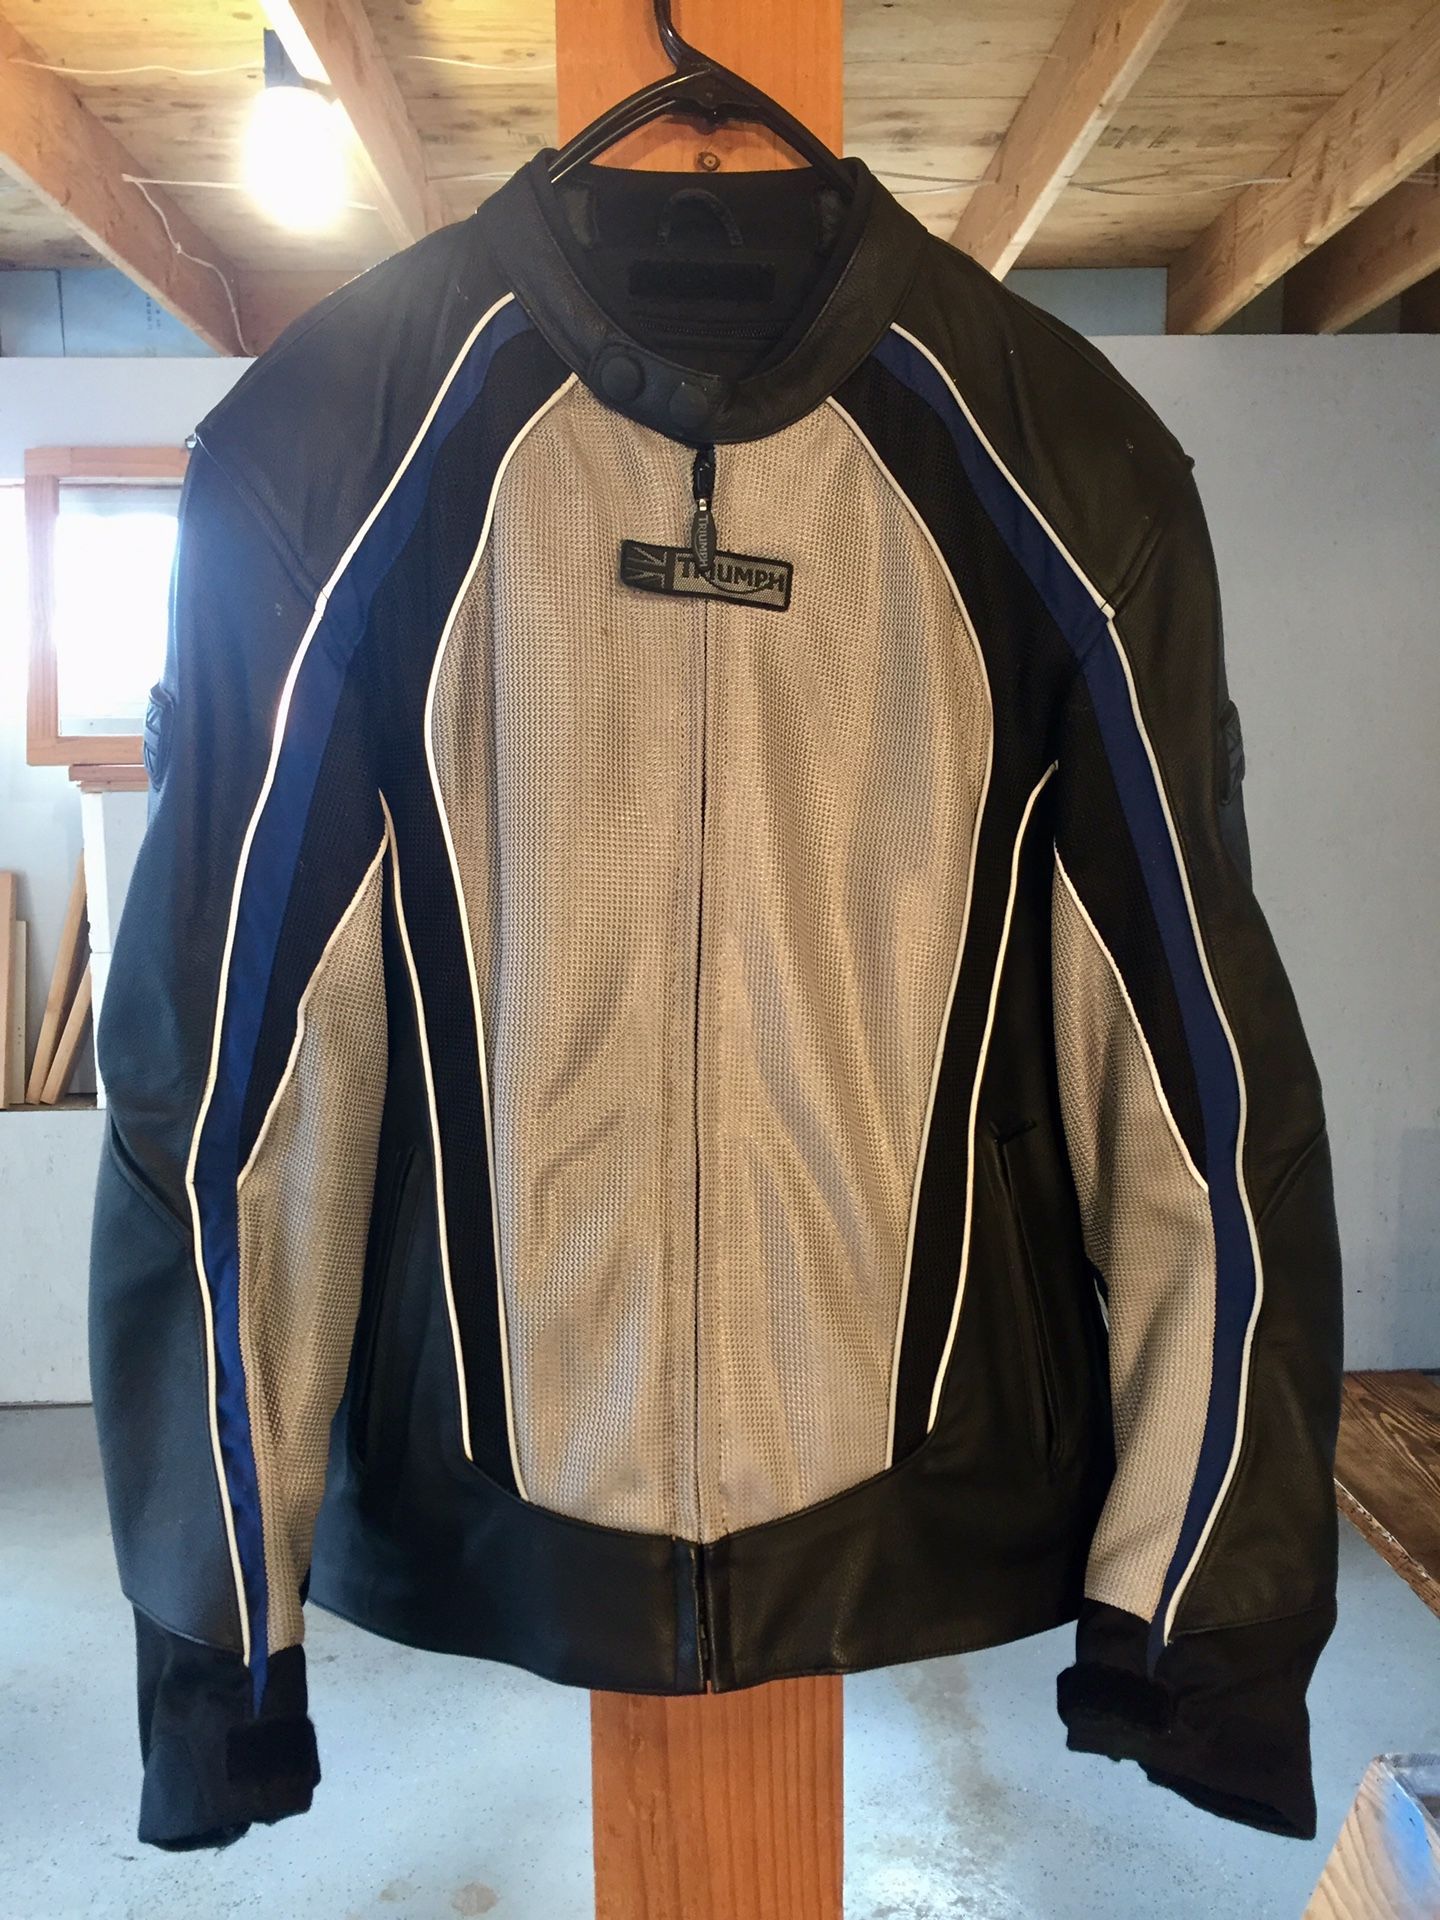 Triumph motorcycle jacket. Very nice. High quality.